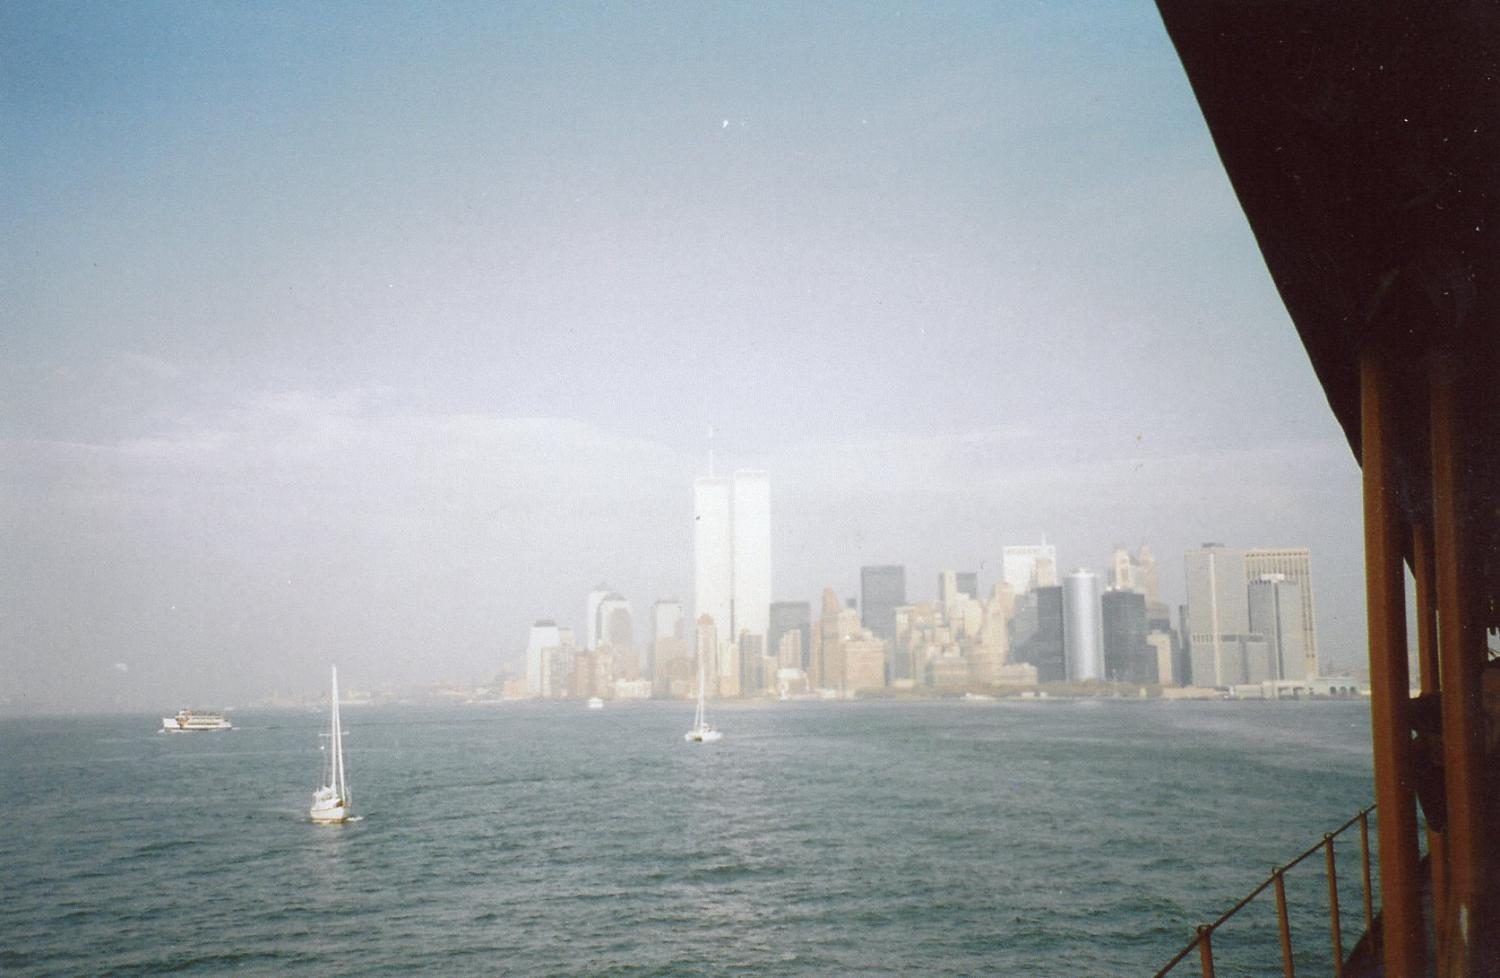 Photo of the WTC taken by Andy Perry